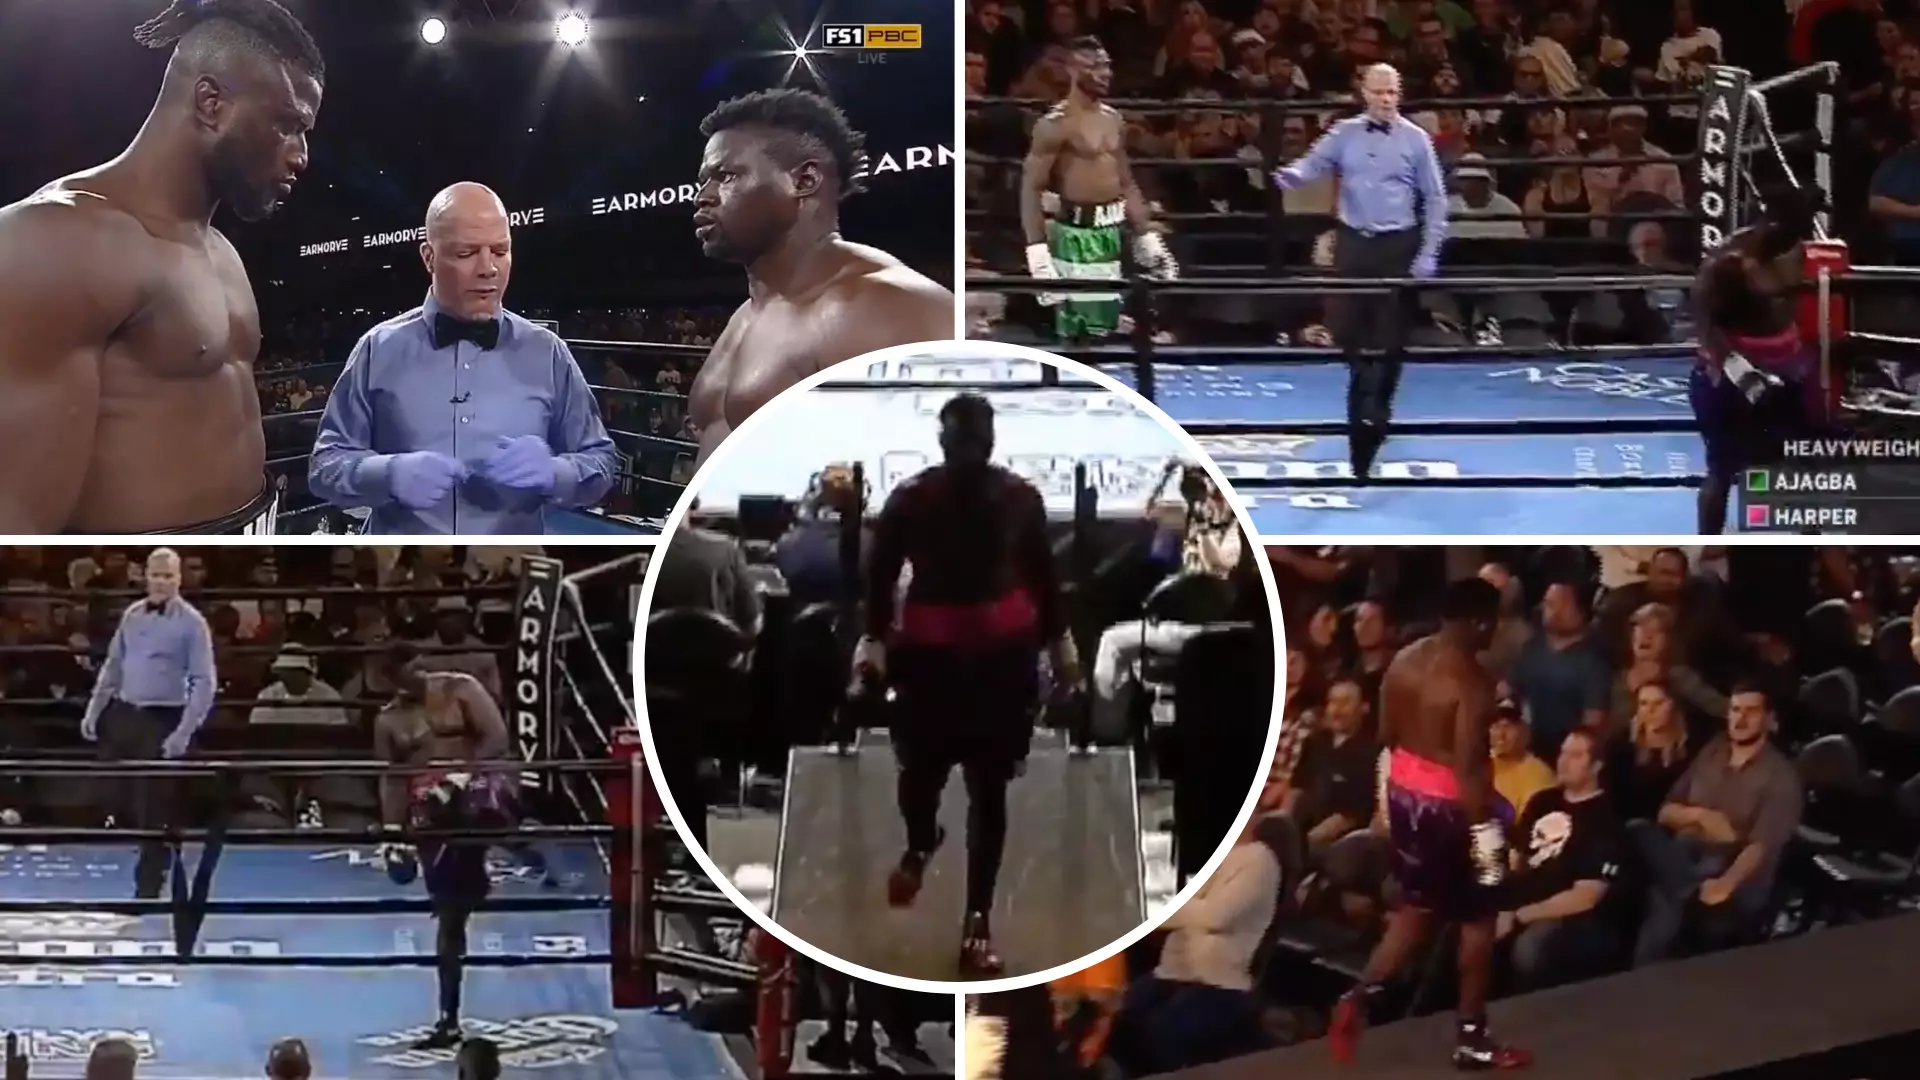 The Incredible Moment When A Boxer Left The Ring Straight After The Bell Rang